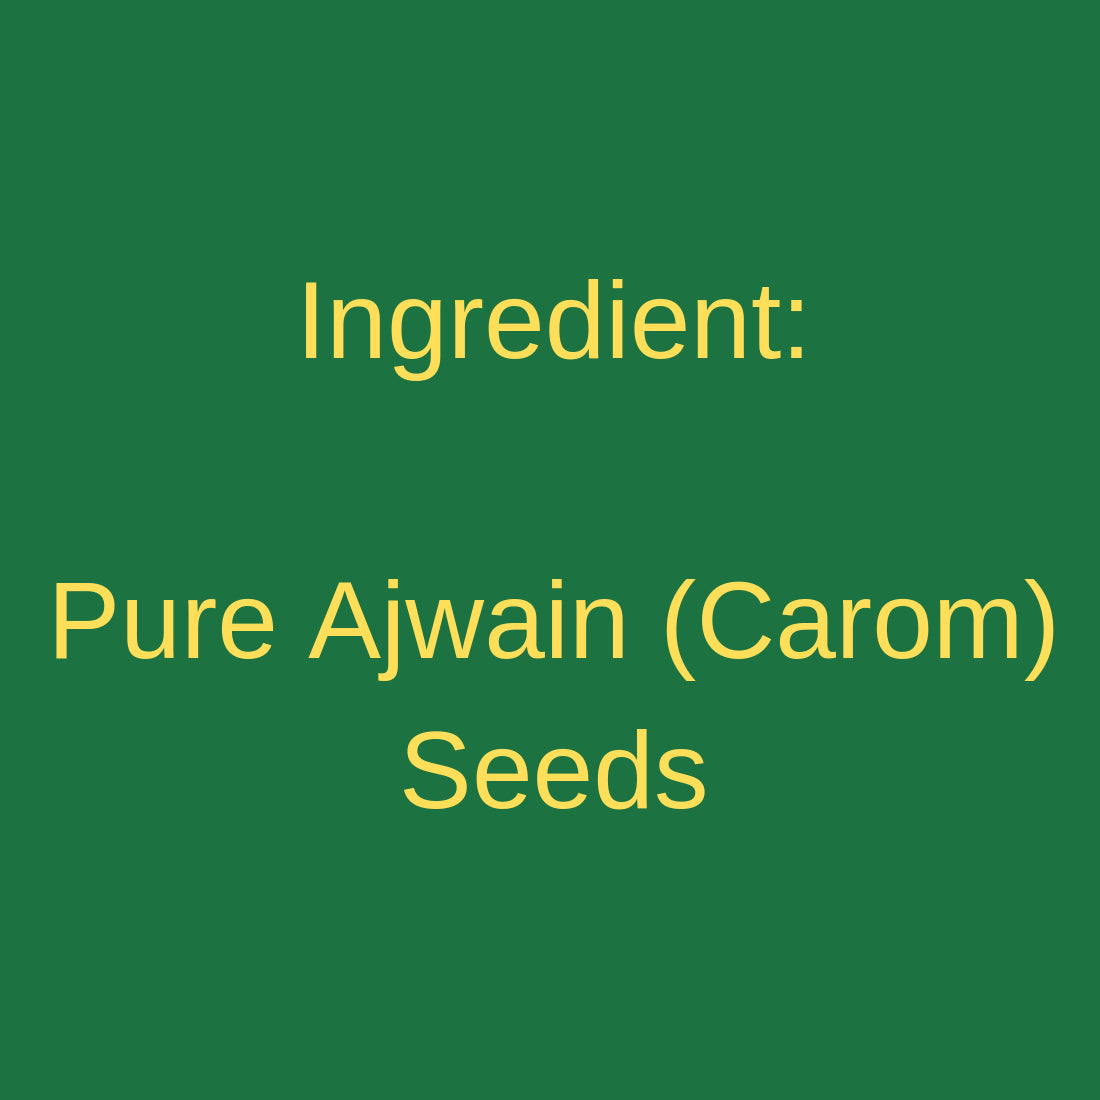 Carom seed oil, a traditional Indian remedy for digestive and respiratory issues